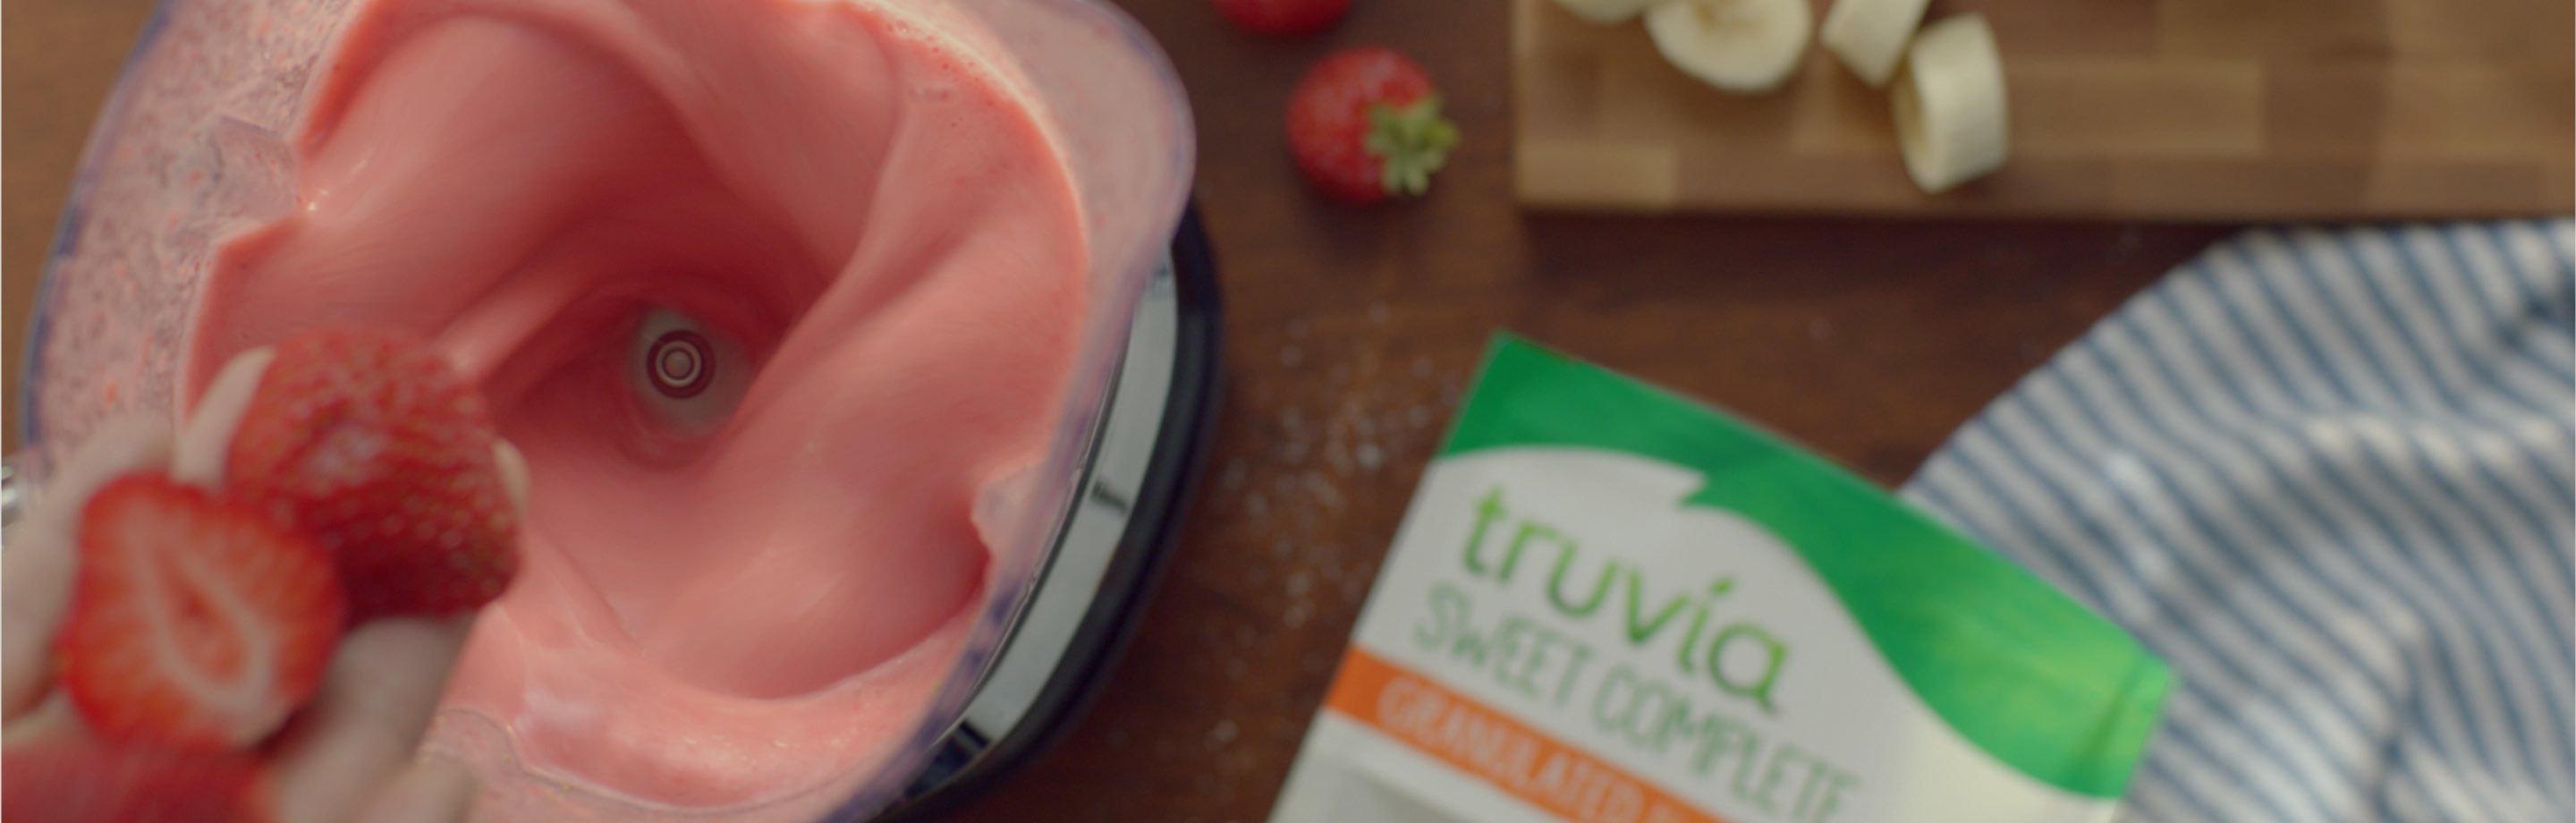 Top view of a blender full of strawberry banana smoothie made with Truvia sweet complete